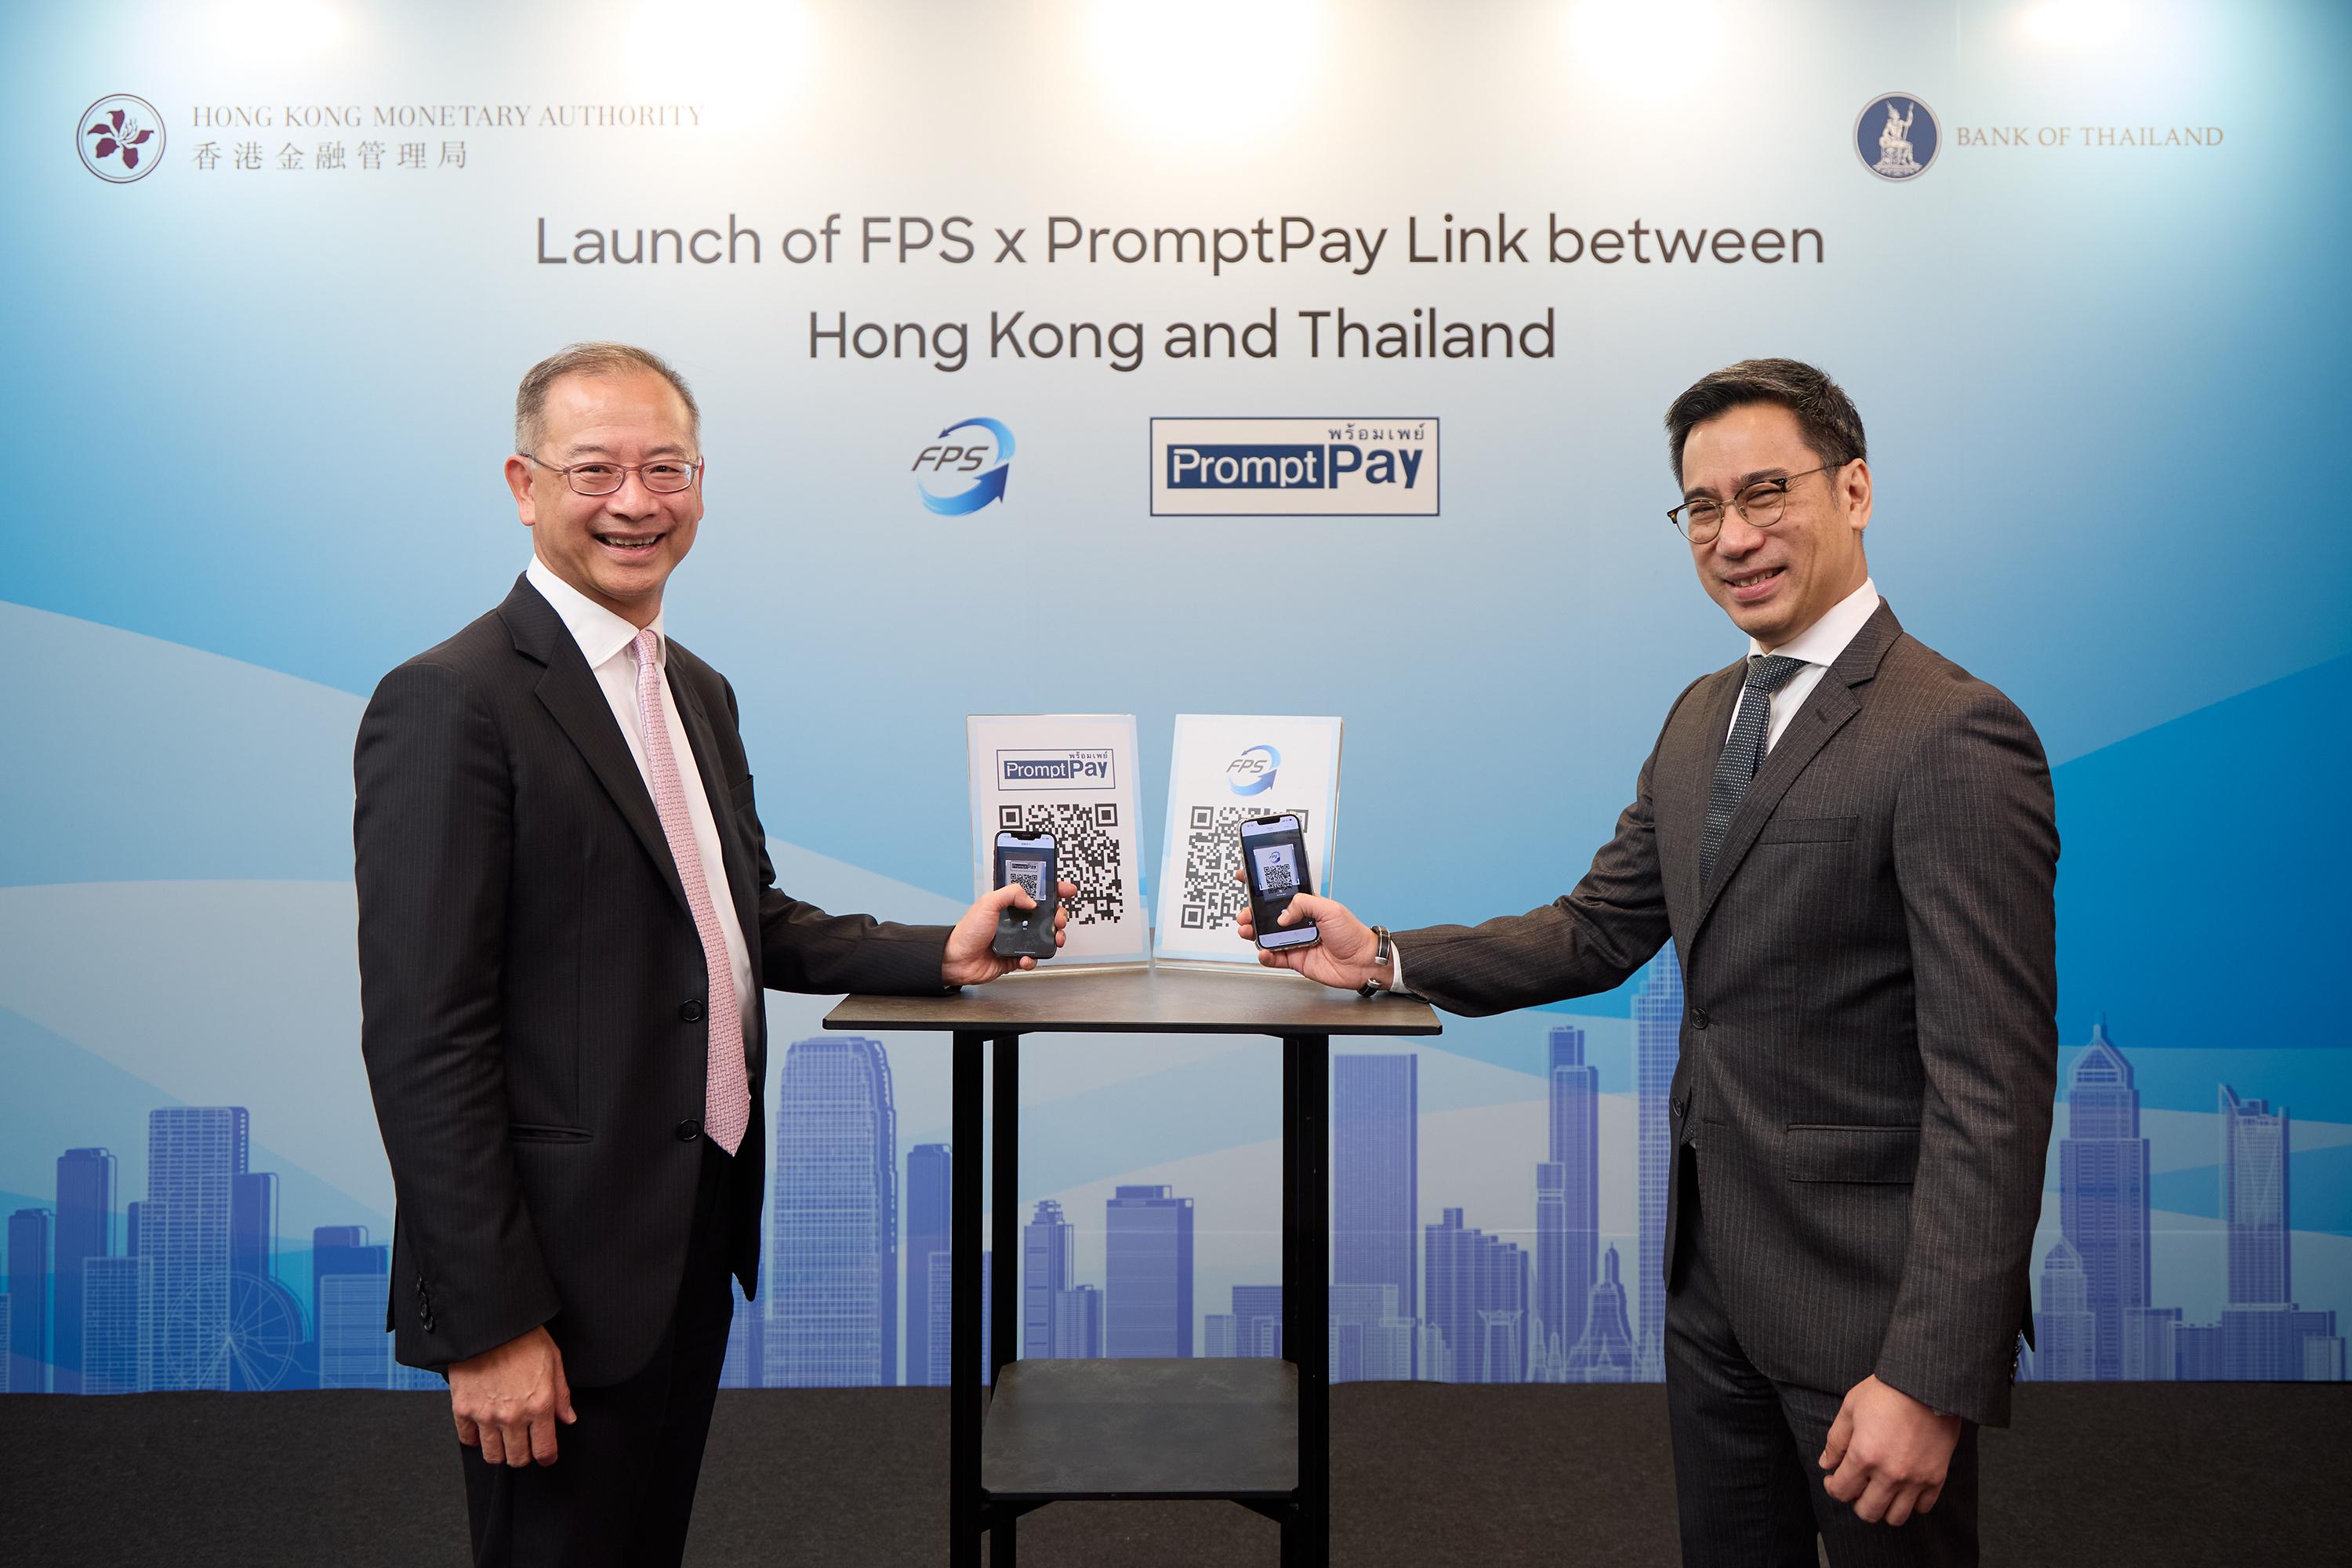 The Chief Executive of the Hong Kong Monetary Authority, Mr Eddie Yue (left), and the Governor of the Bank of Thailand, Dr Sethaput Suthiwartnarueput (right), attend the launching ceremony of the FPS x PromptPay Link.